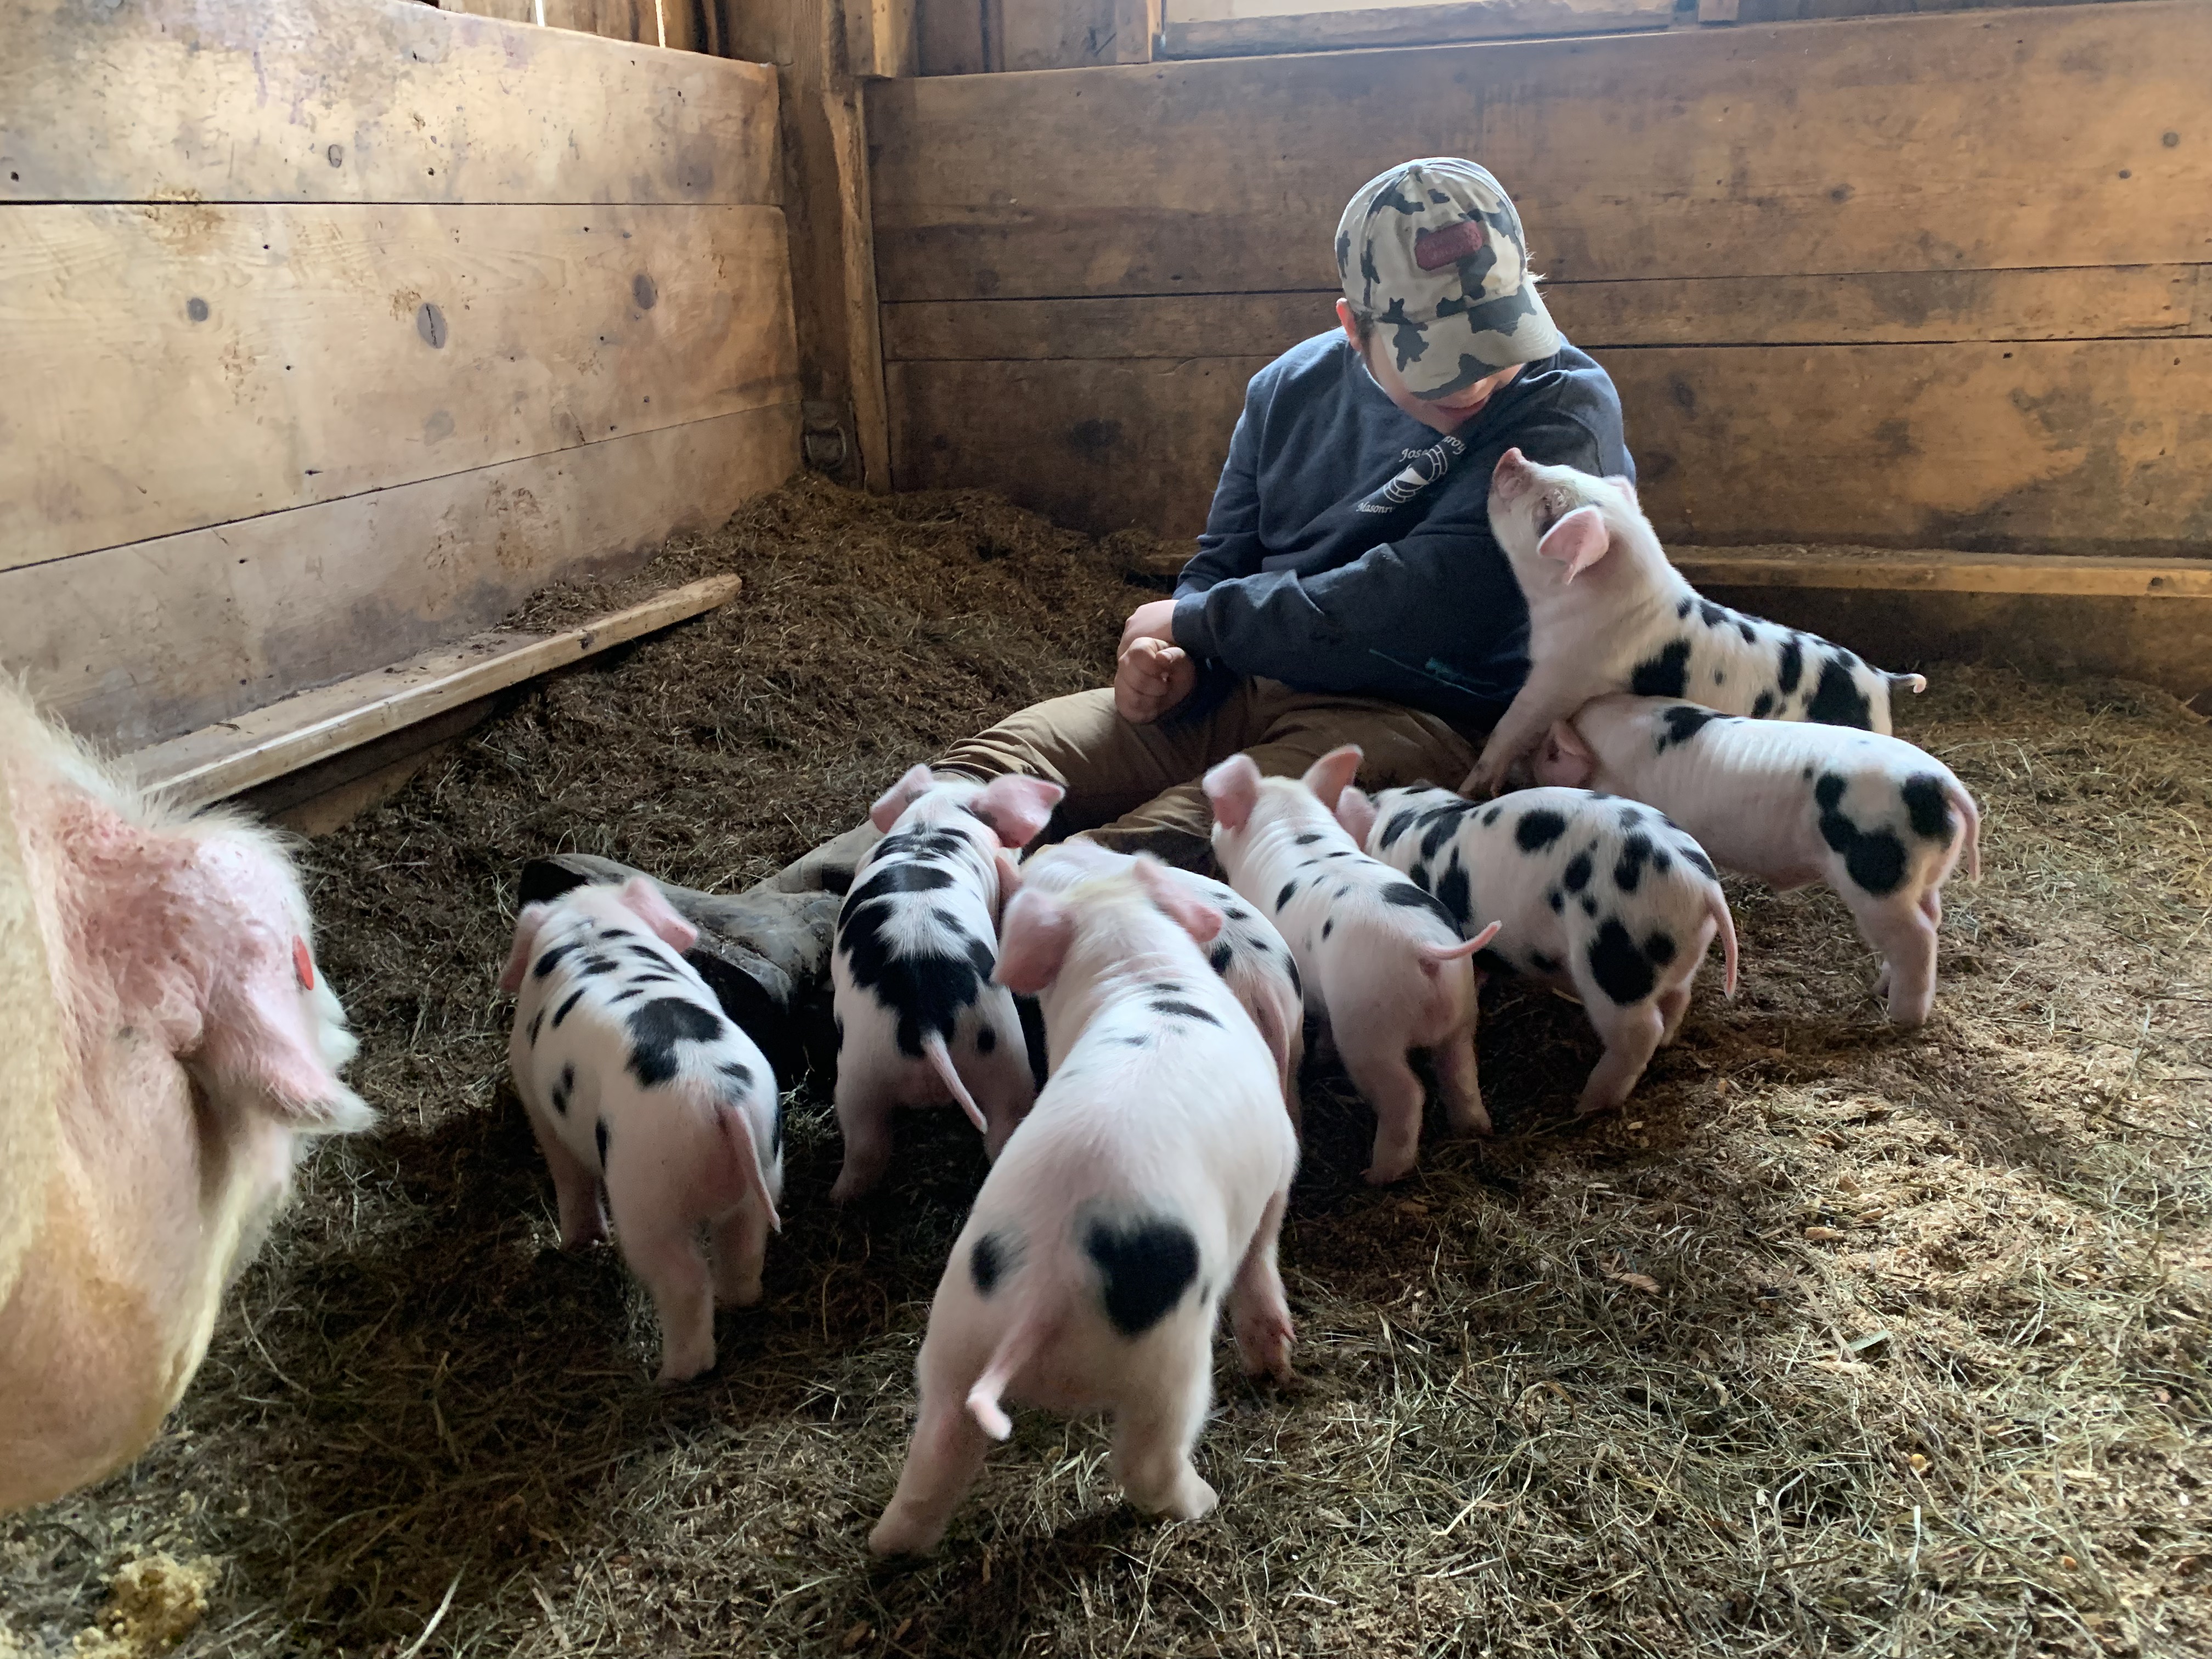 One of the Gentile's son sits with pigs in the barn. Image Credit: The Gentiles